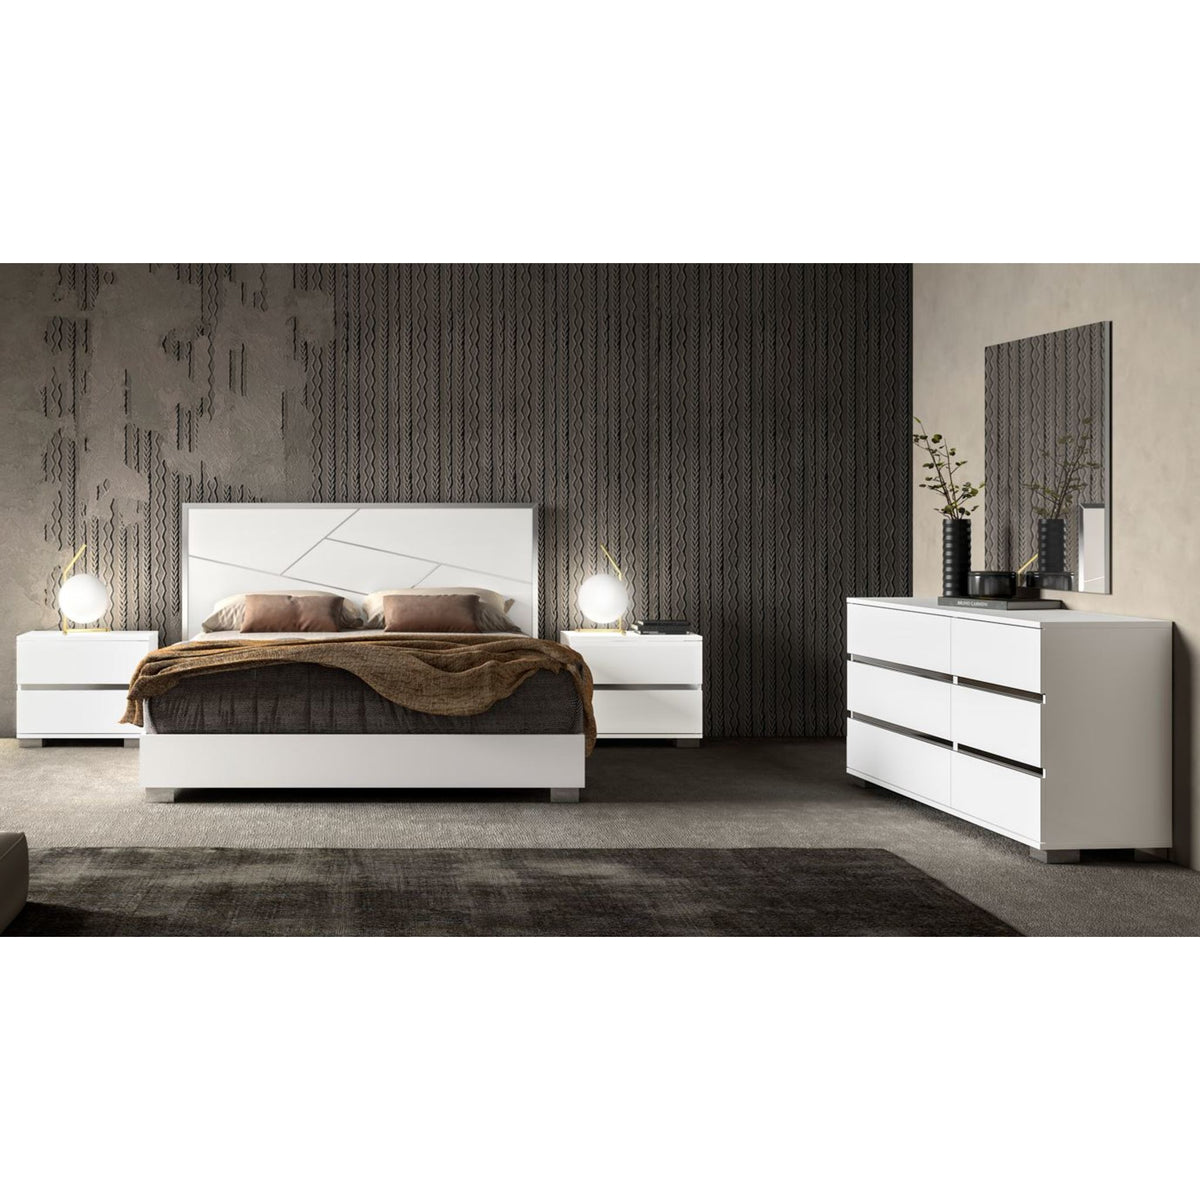 Palermo Queen Panel Bedroom - Dream White | Dufresne Furniture and ...